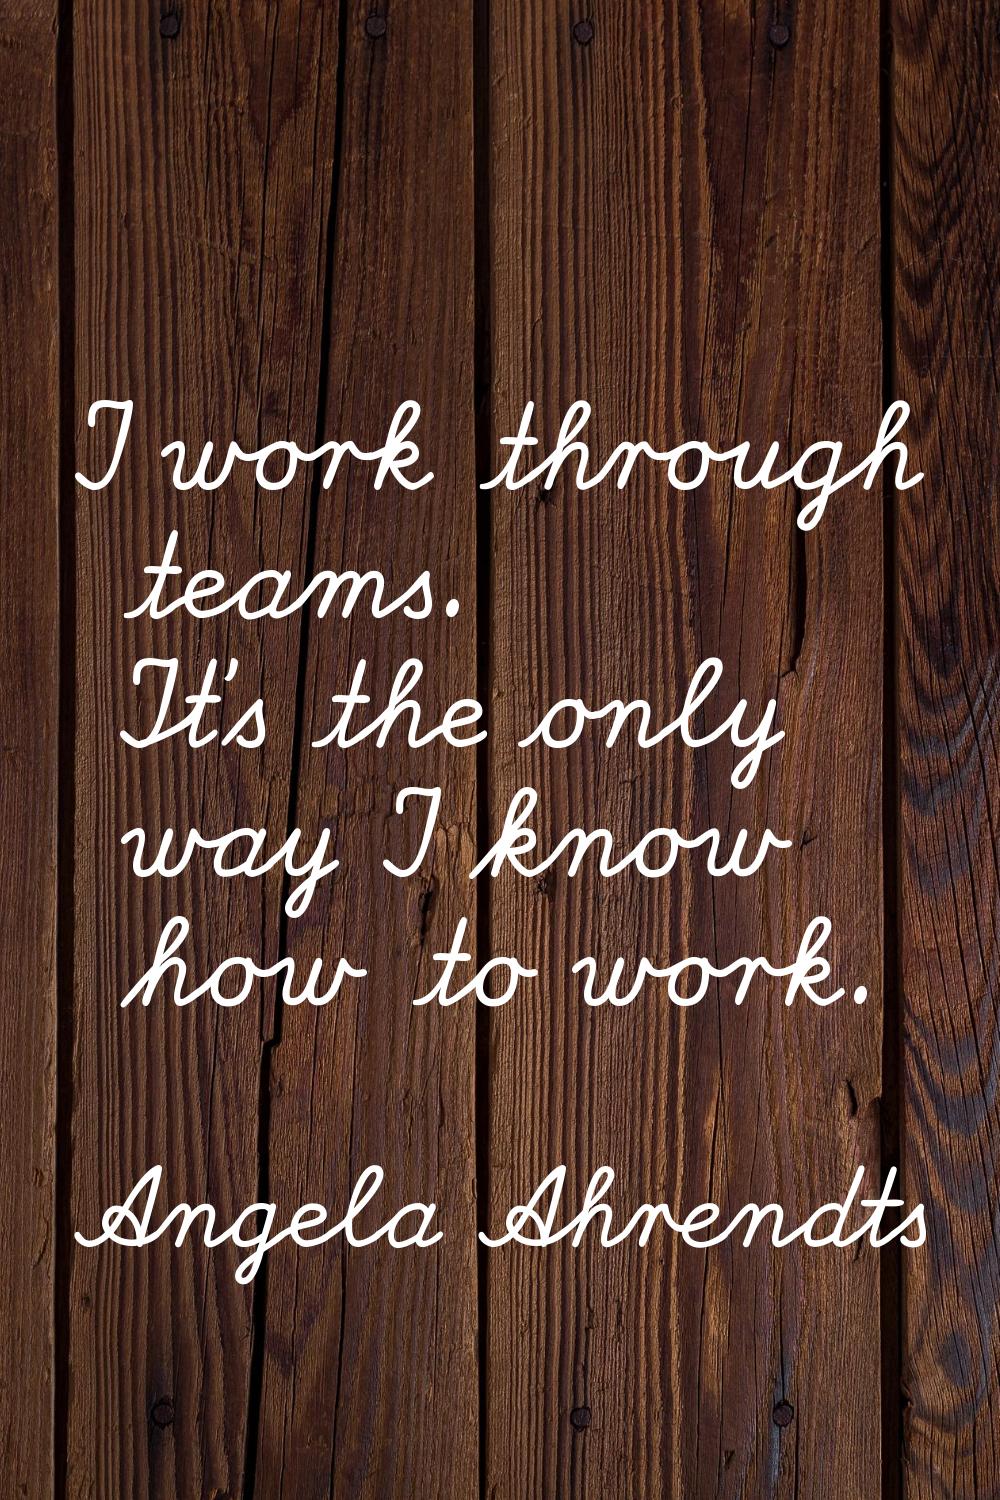 I work through teams. It's the only way I know how to work.